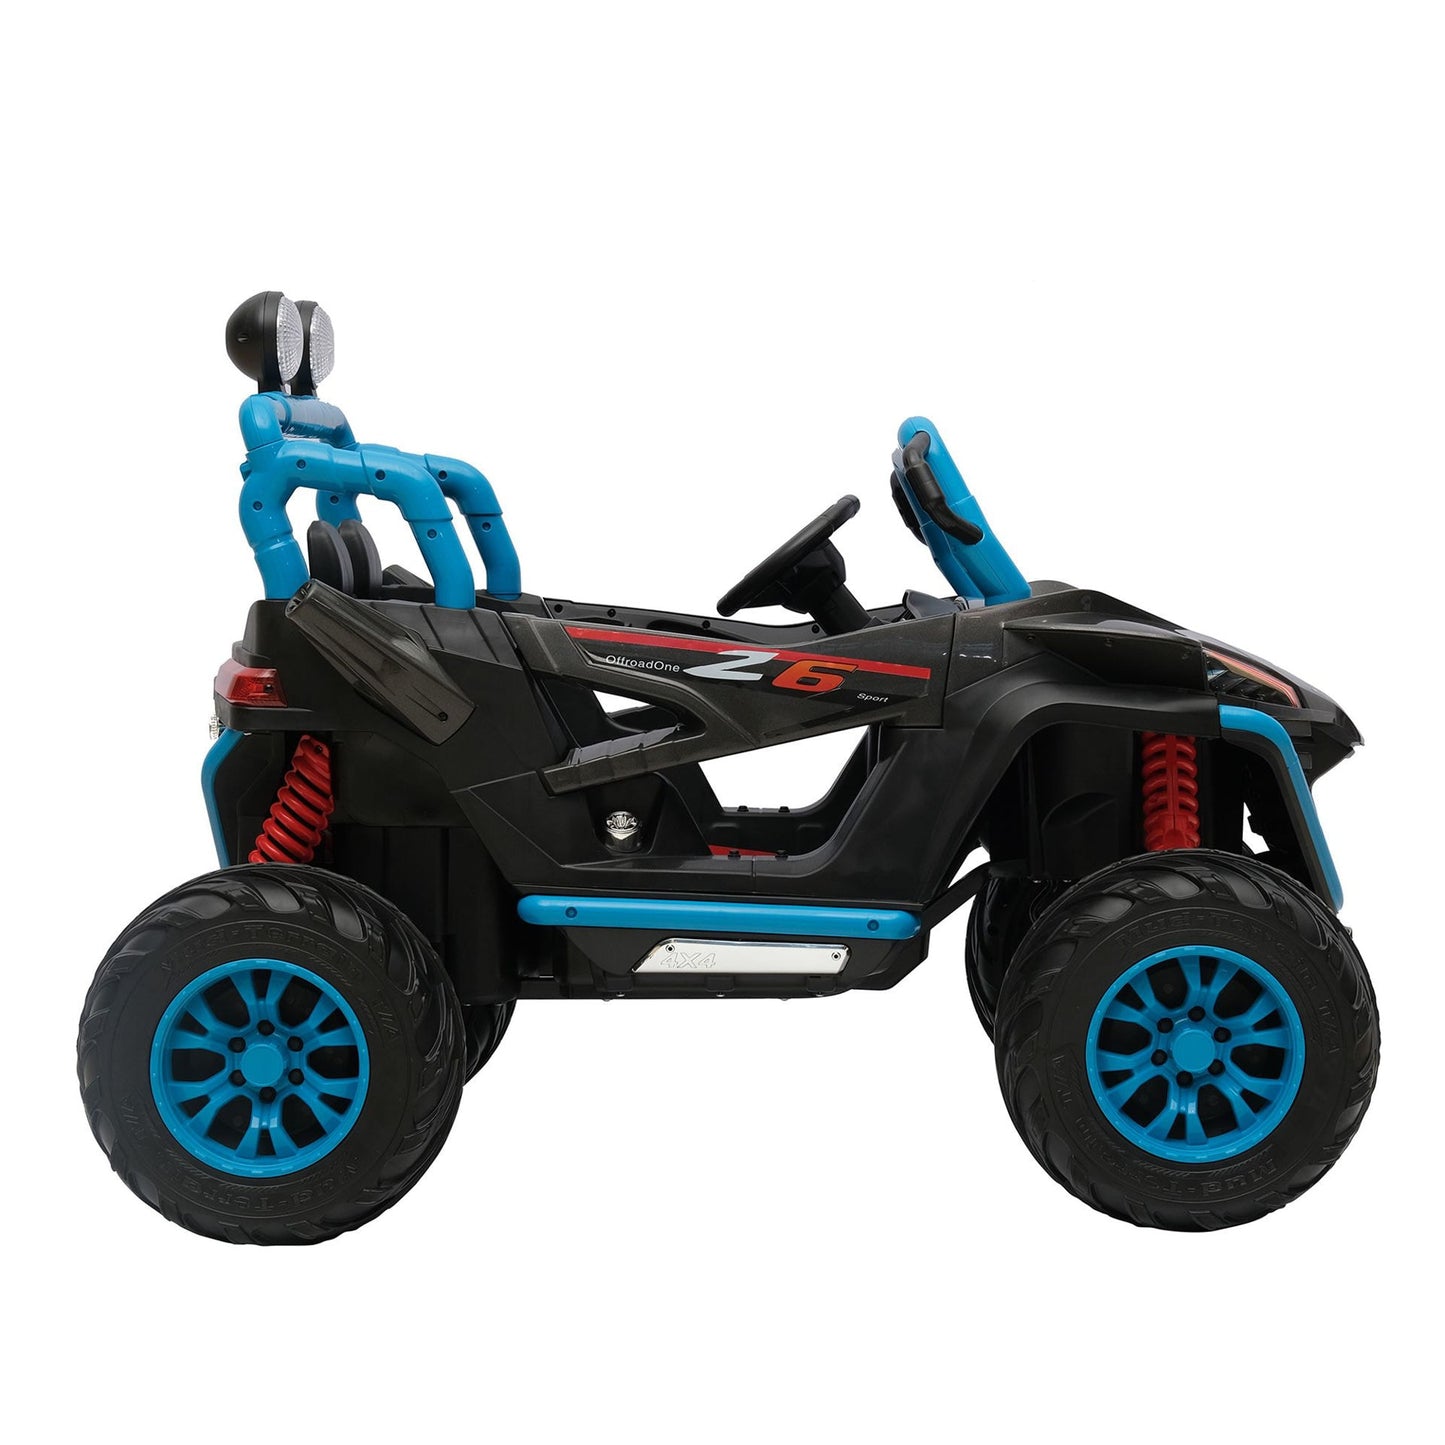 Chenxn 988 Mini Jeep for Kids with Remote - COOLBABY